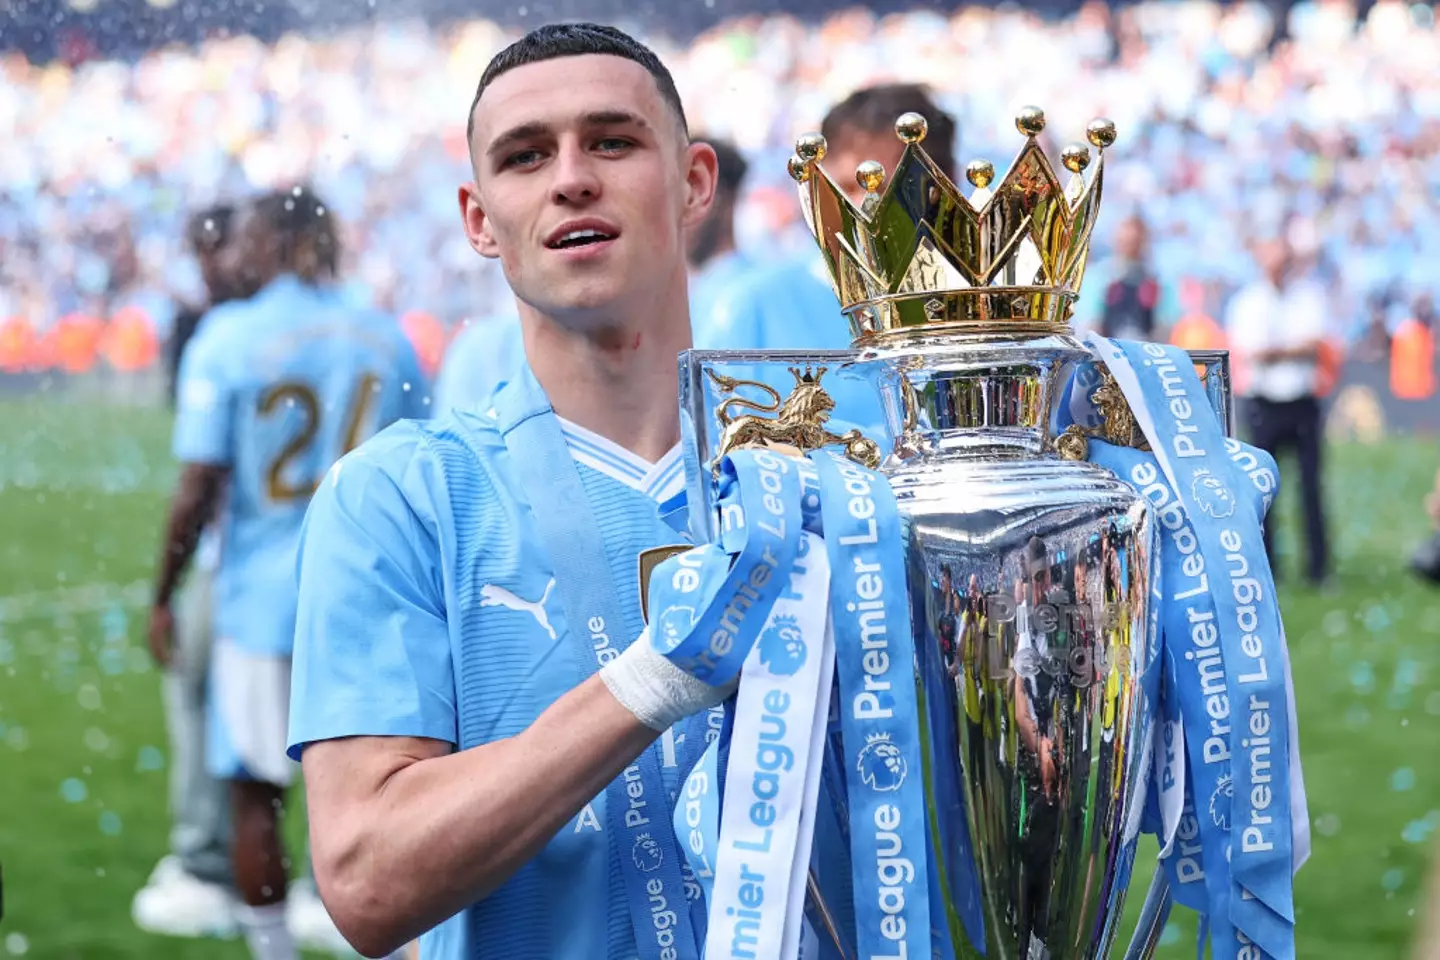 Foden has won a fourth consecutive Premier League title with Man City (Image: Getty)